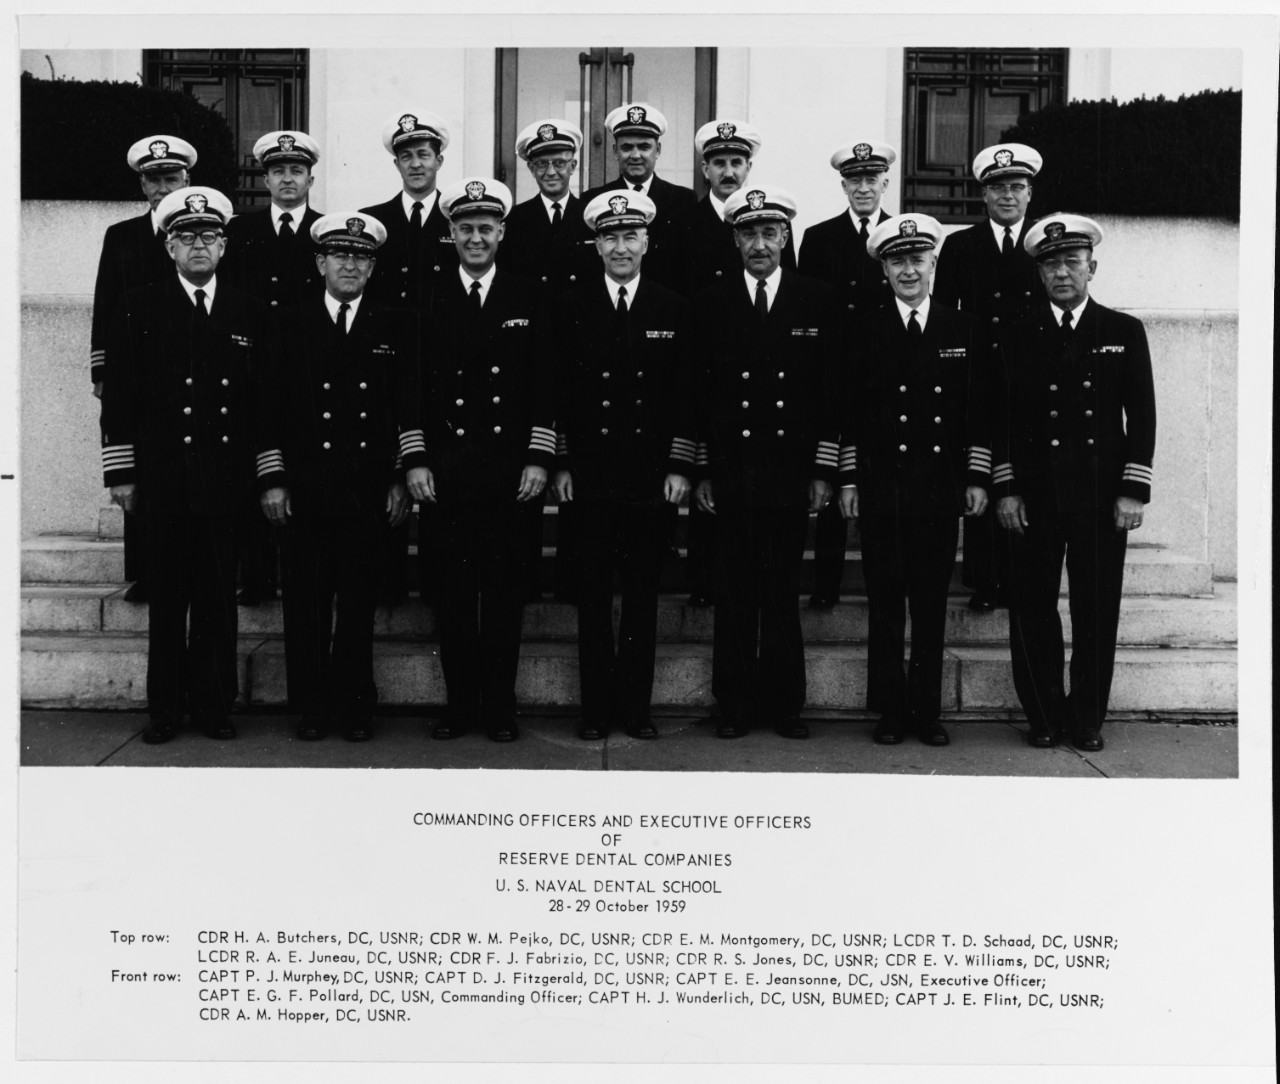 Commanding and Executive Officers of Naval Reserve Dental Companies